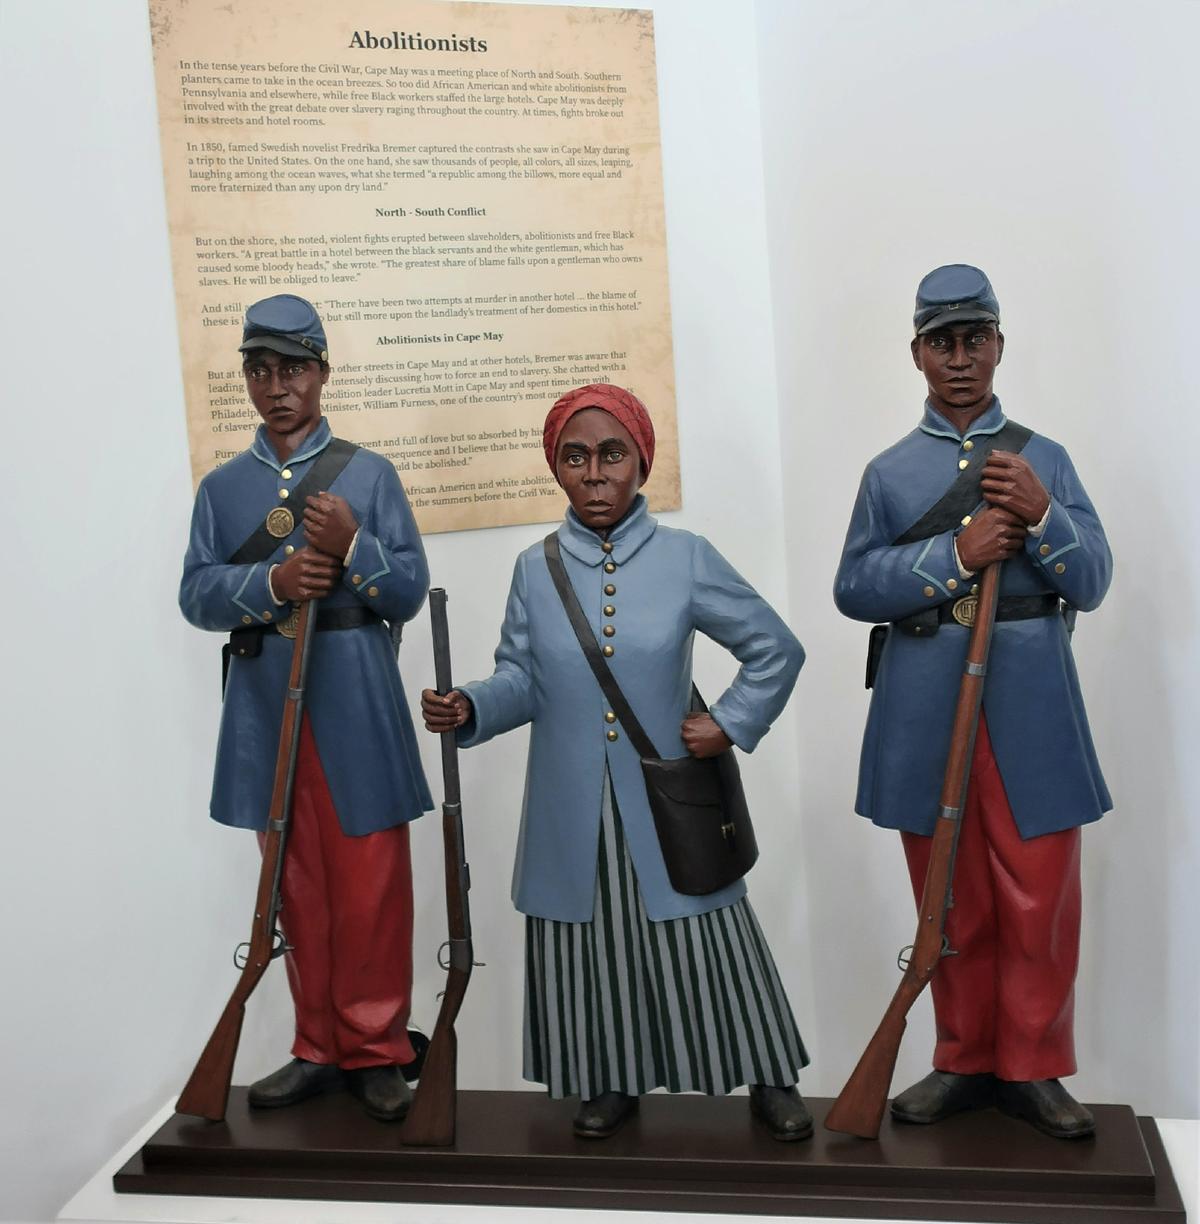 Figures at the Harriet Tubman Museum in Cape May, New Jersey, help tell the story of this heroic woman’s role in the Underground Railroad. (Photo courtesy of Victor Block)